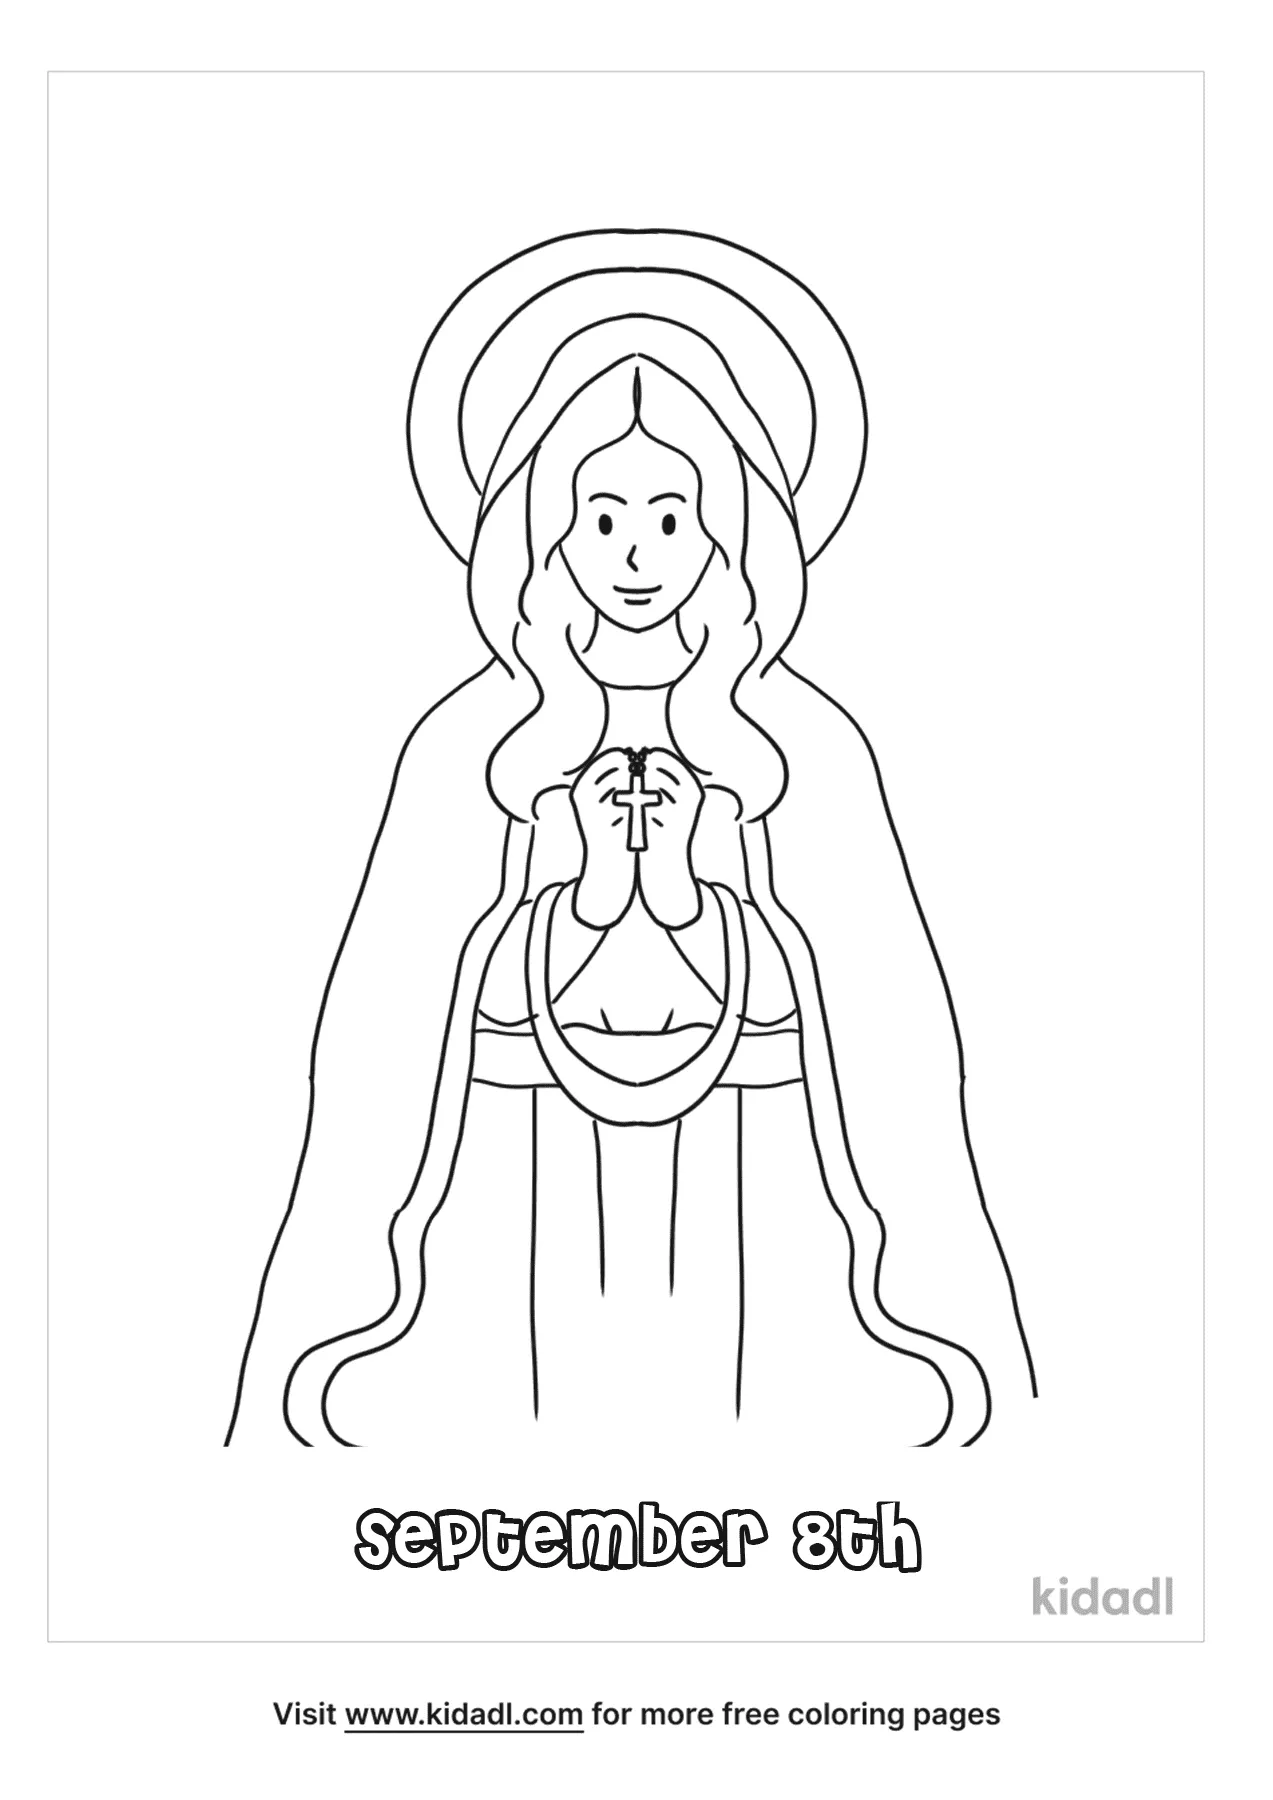 Free marys birthday september th coloring page coloring page printables